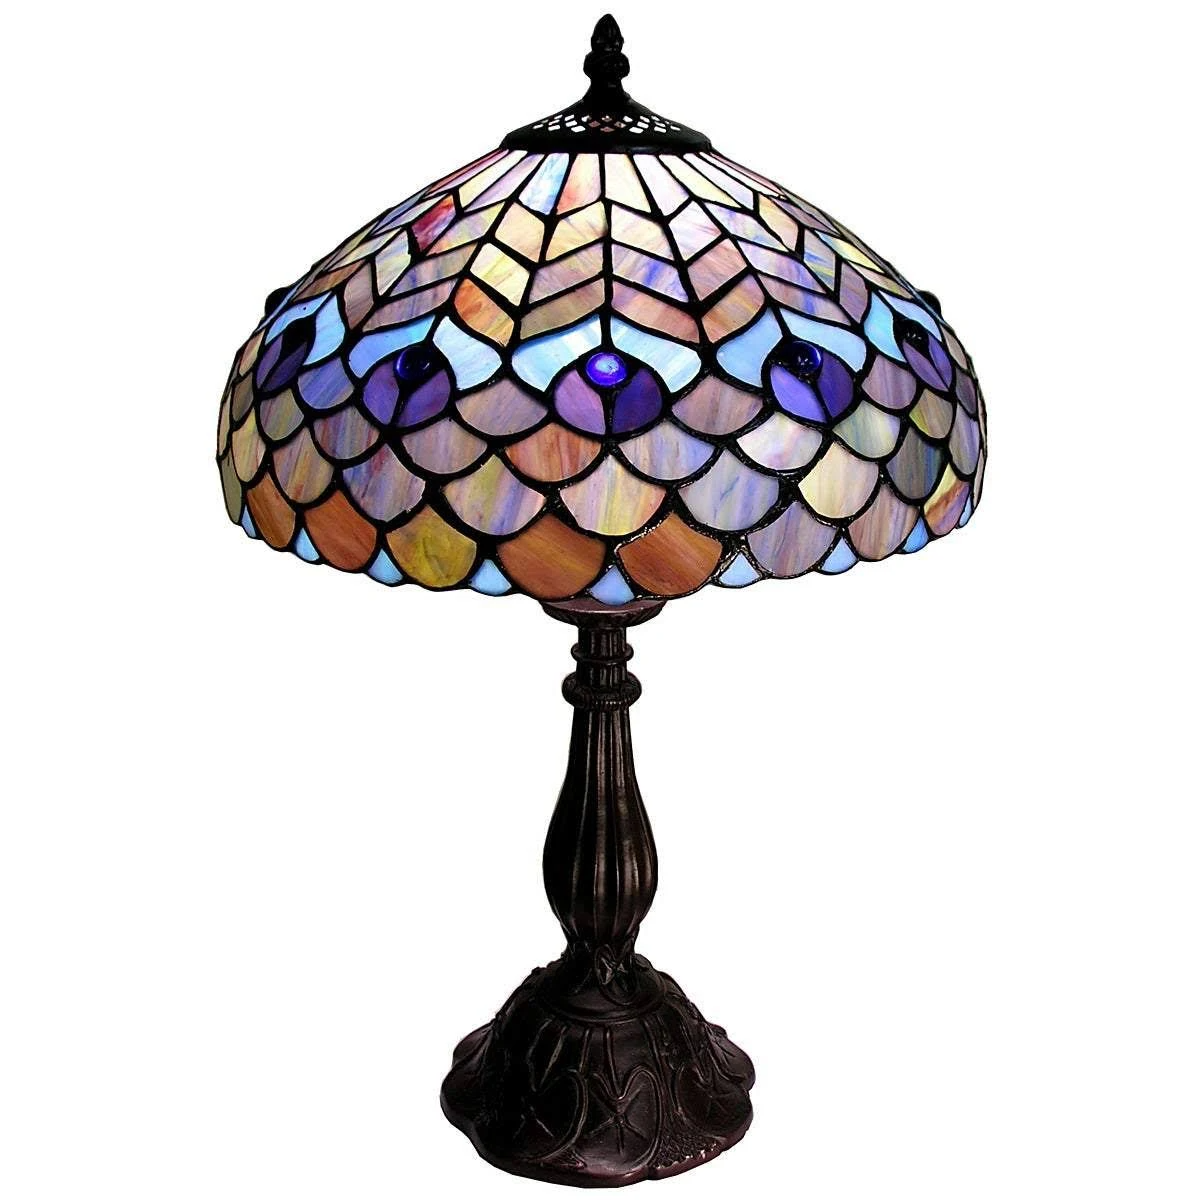 Handcrafted Peacock Table Lamp